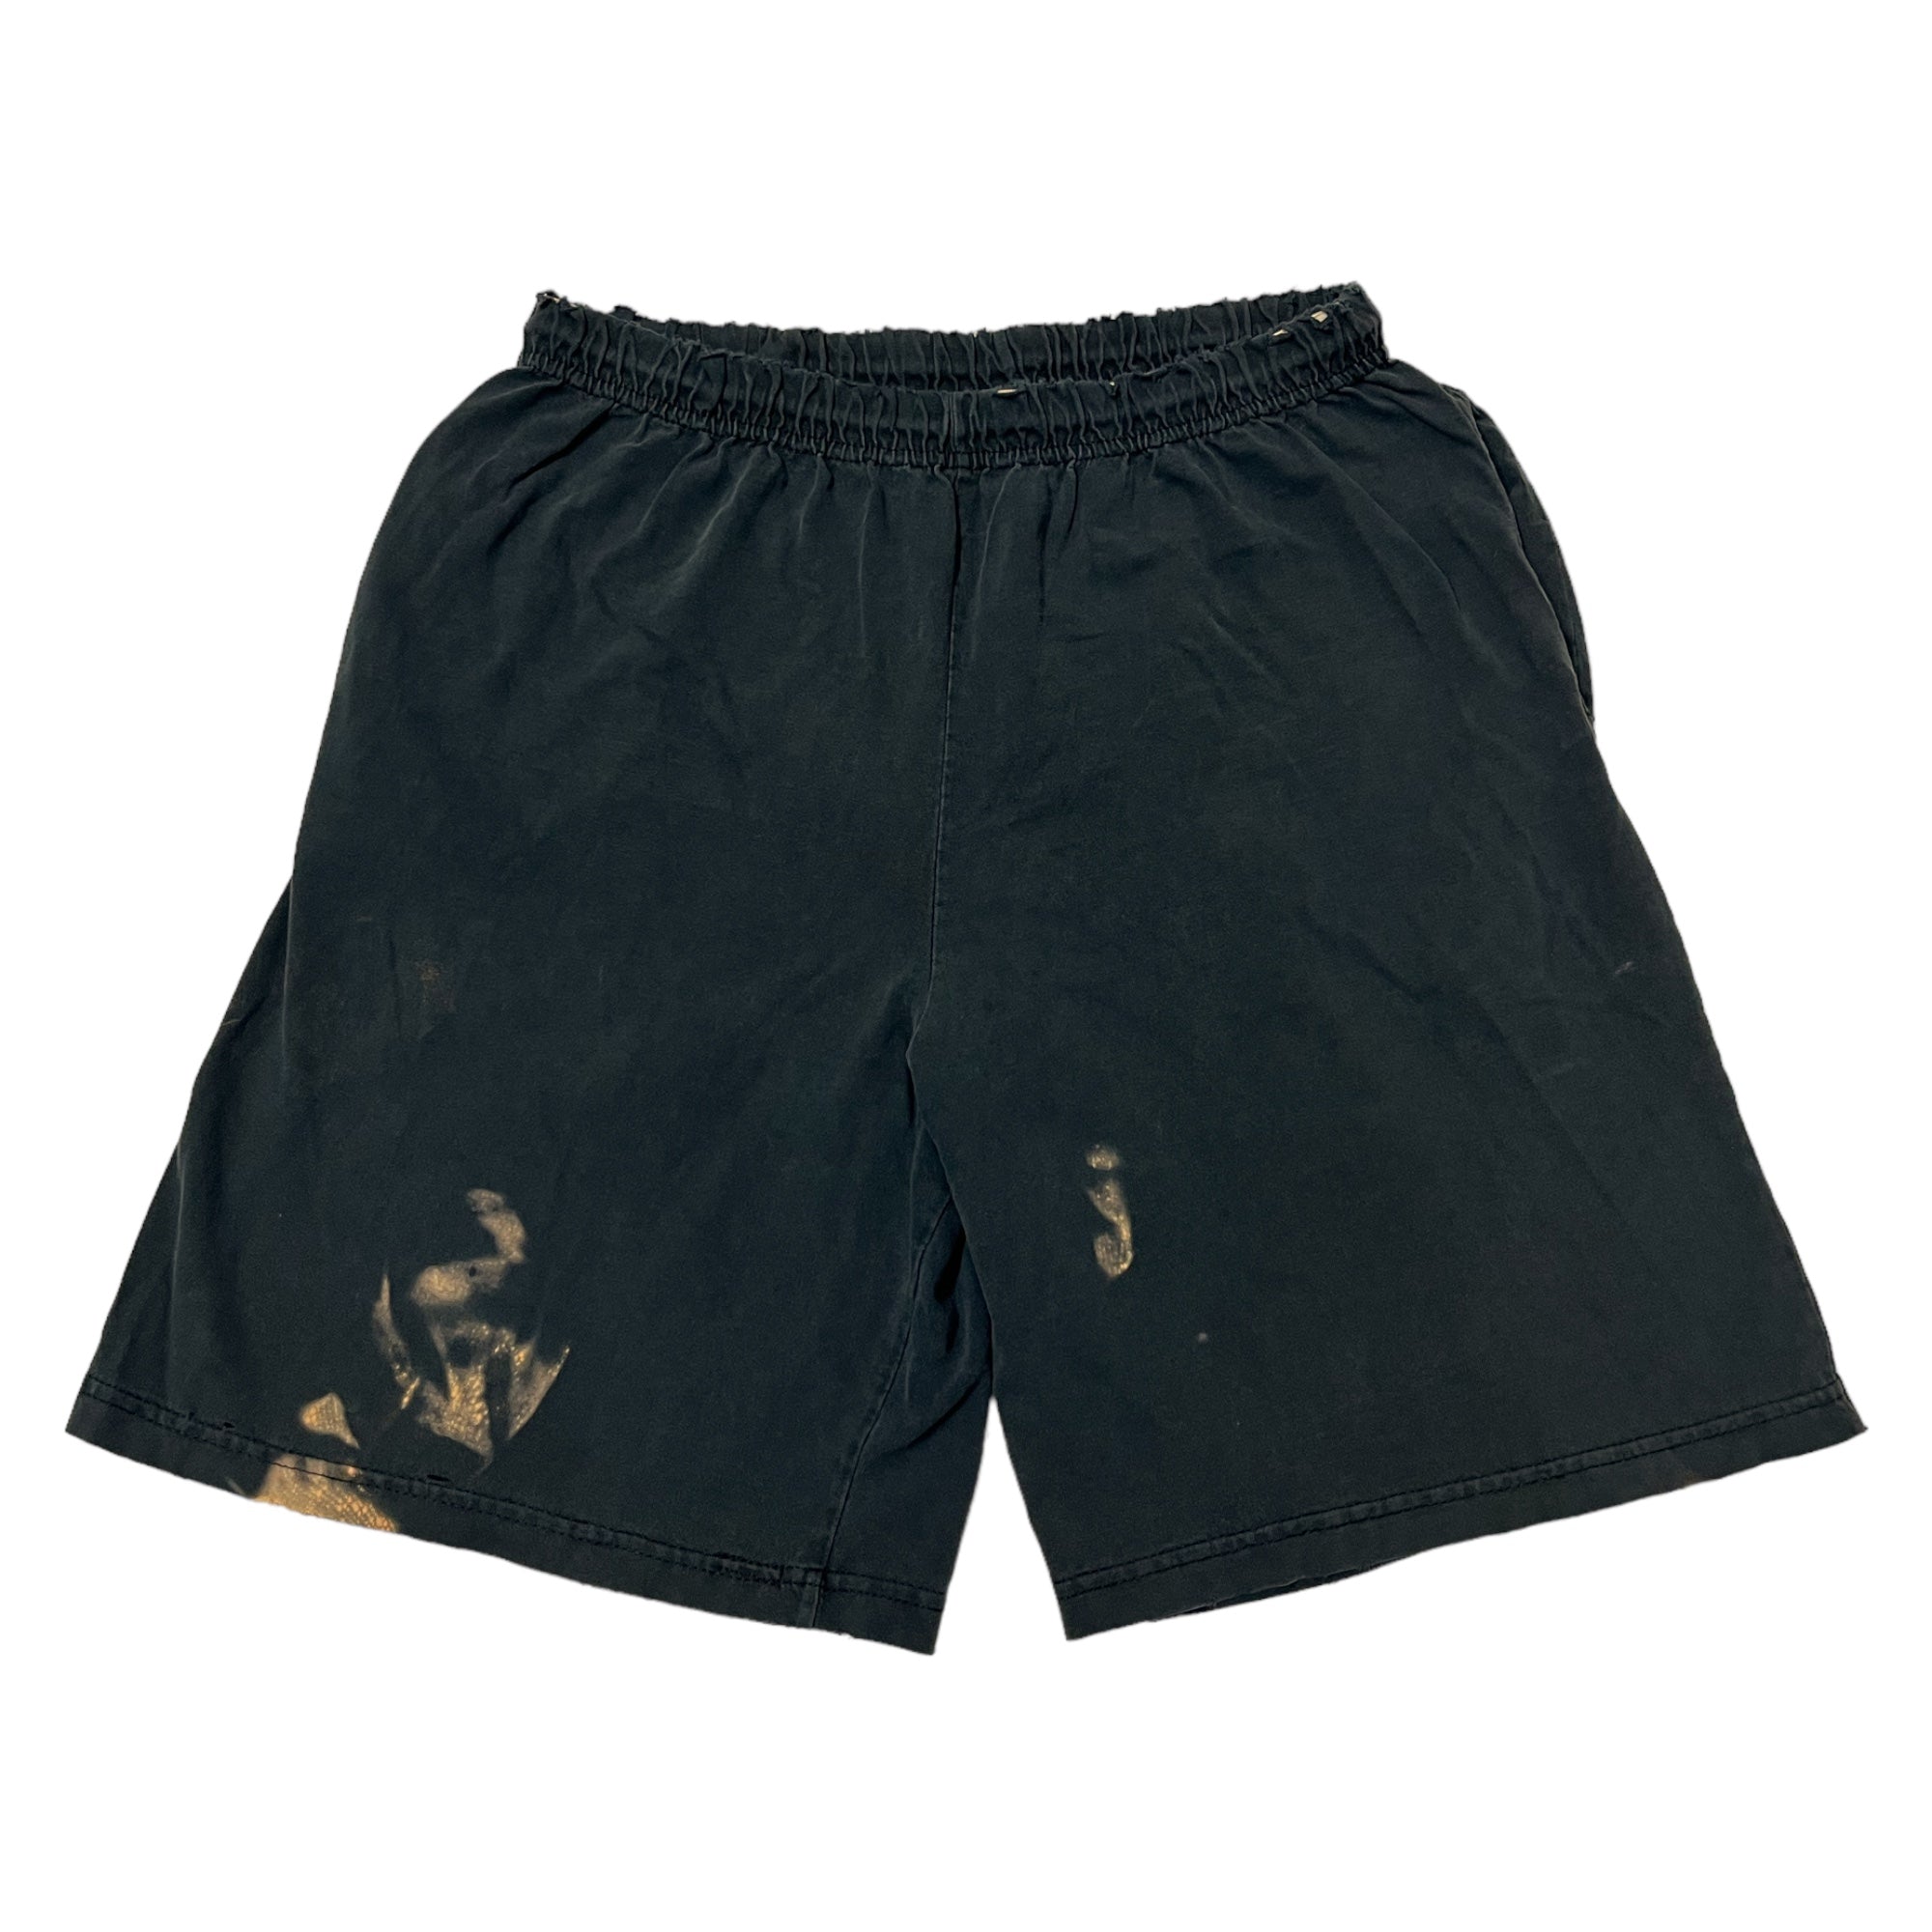 Distressed Sweat Shorts with Visible Waist Band - Faded Black - 14.5-21”